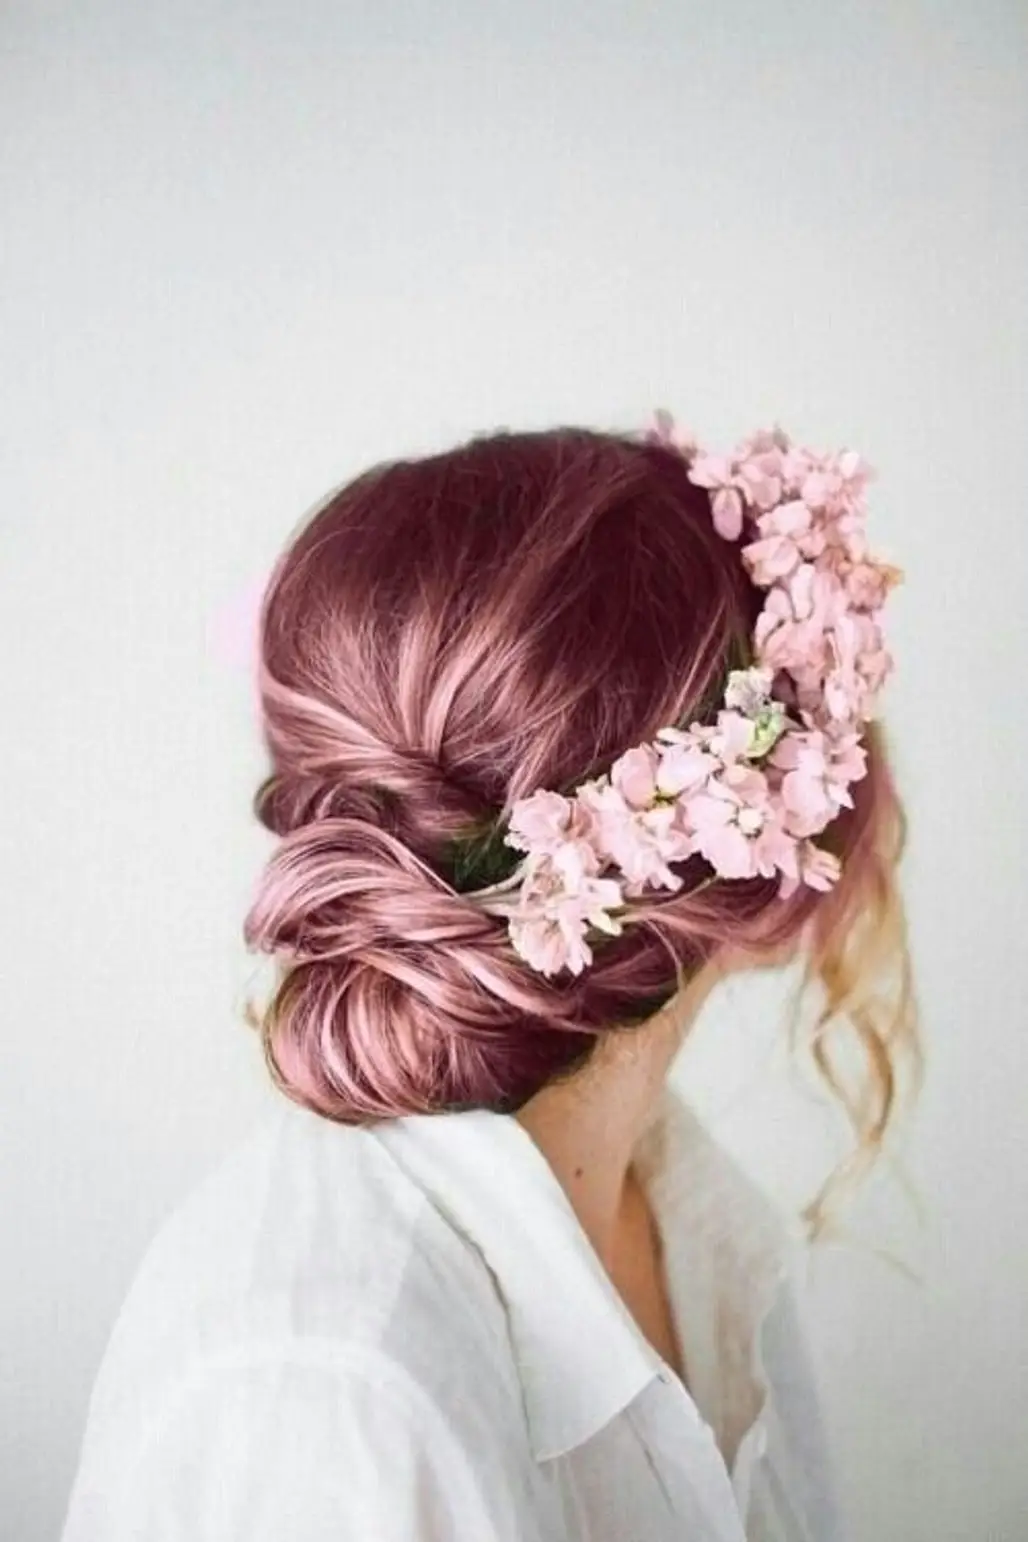 hair,bridal accessory,clothing,pink,hairstyle,